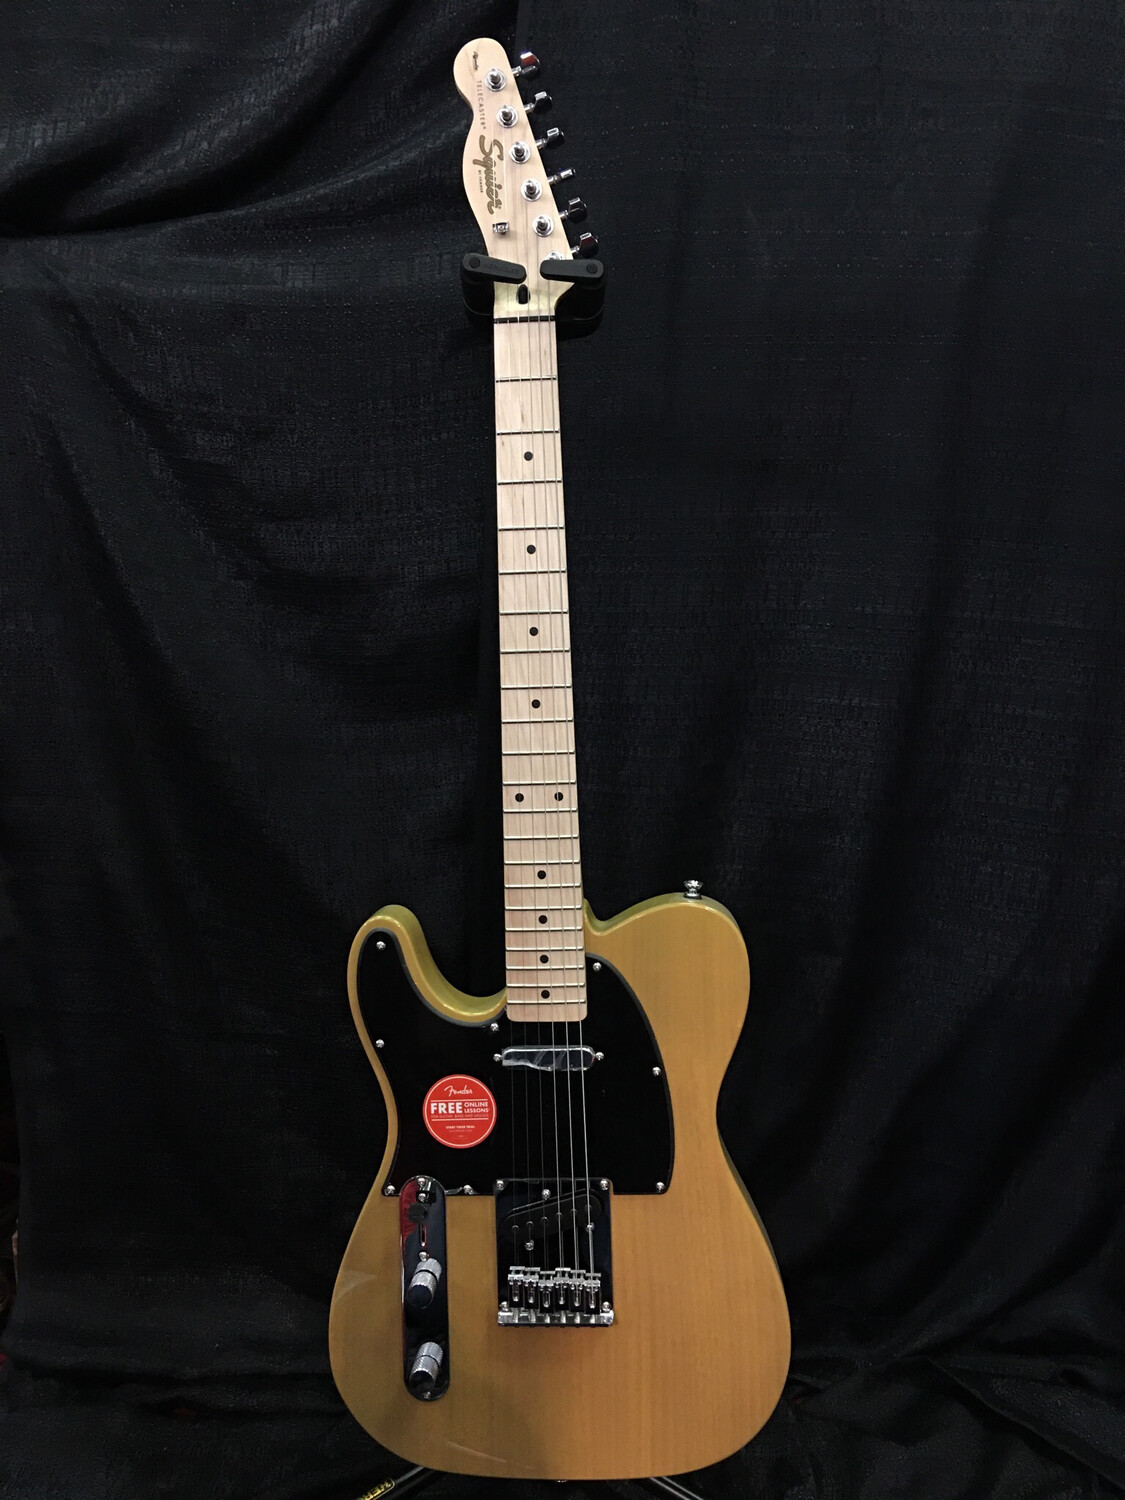 Squier Affinity Series Left Handed Telecaster - Butterscotch Blonde 0310223550